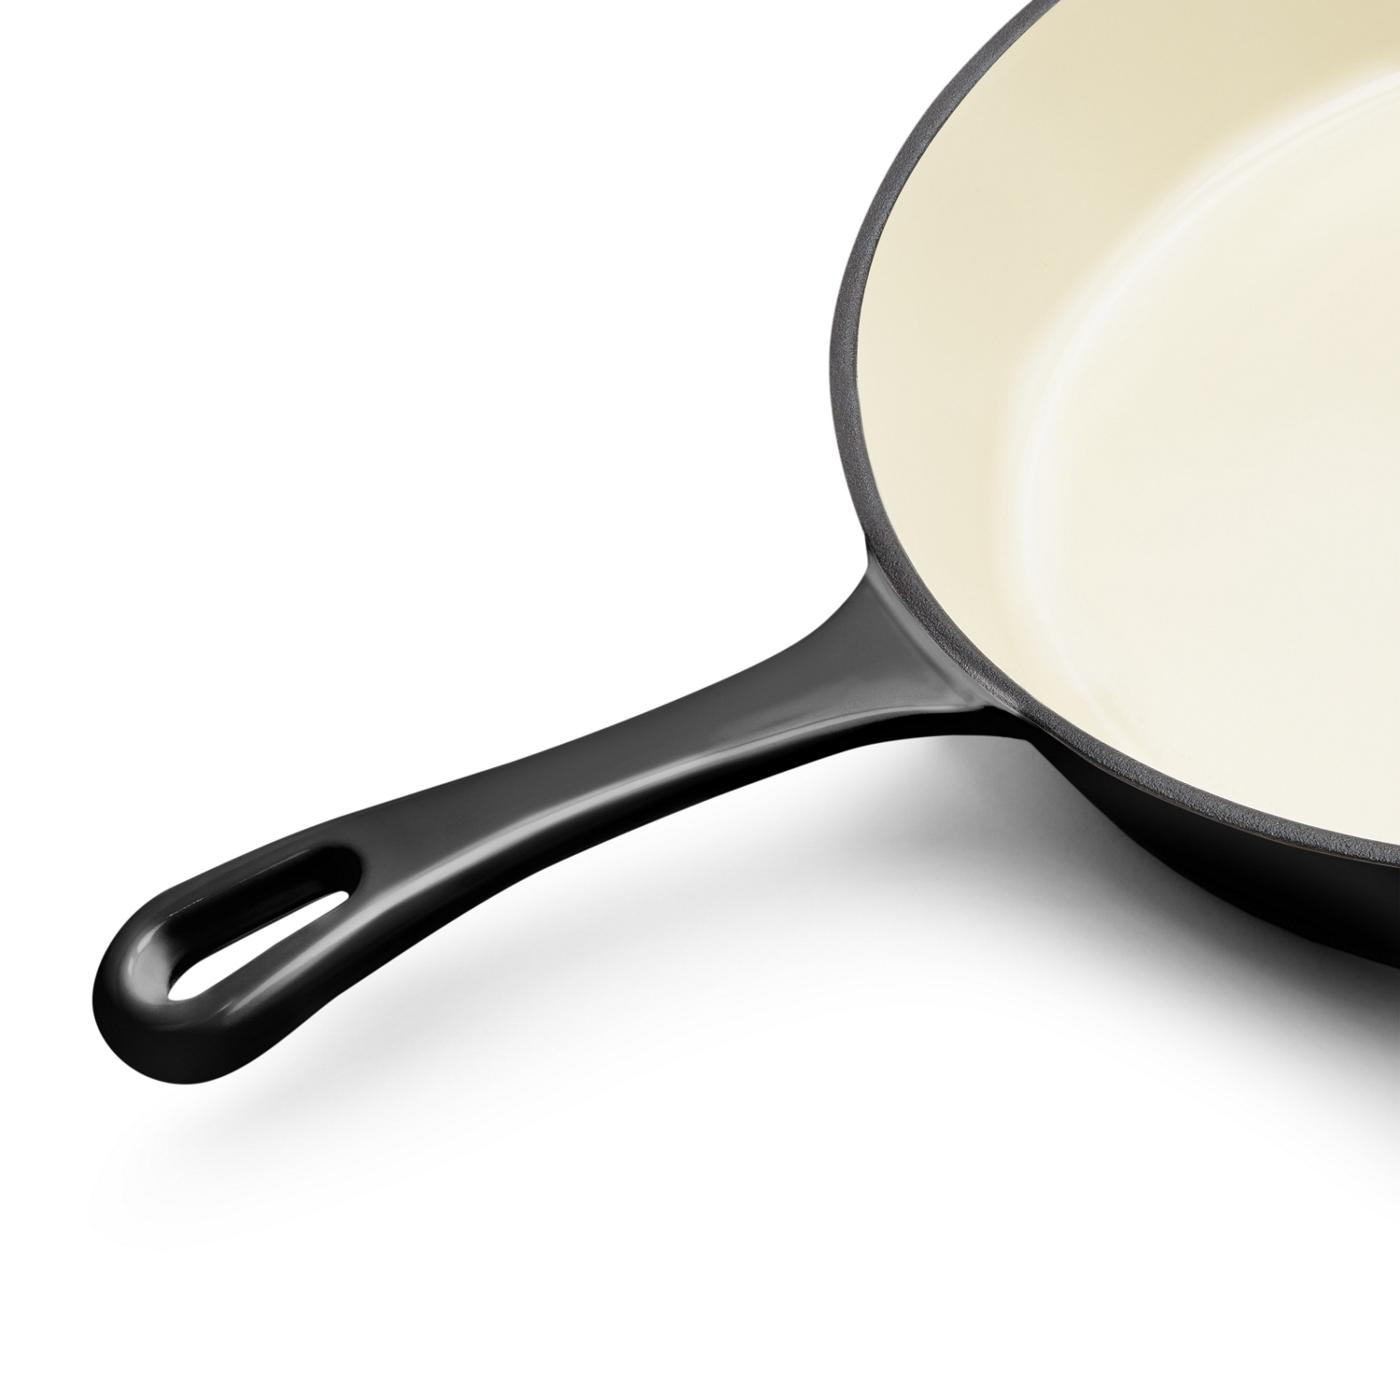 Kitchen & Table by H-E-B Enameled Cast Iron Skillet - Classic Black